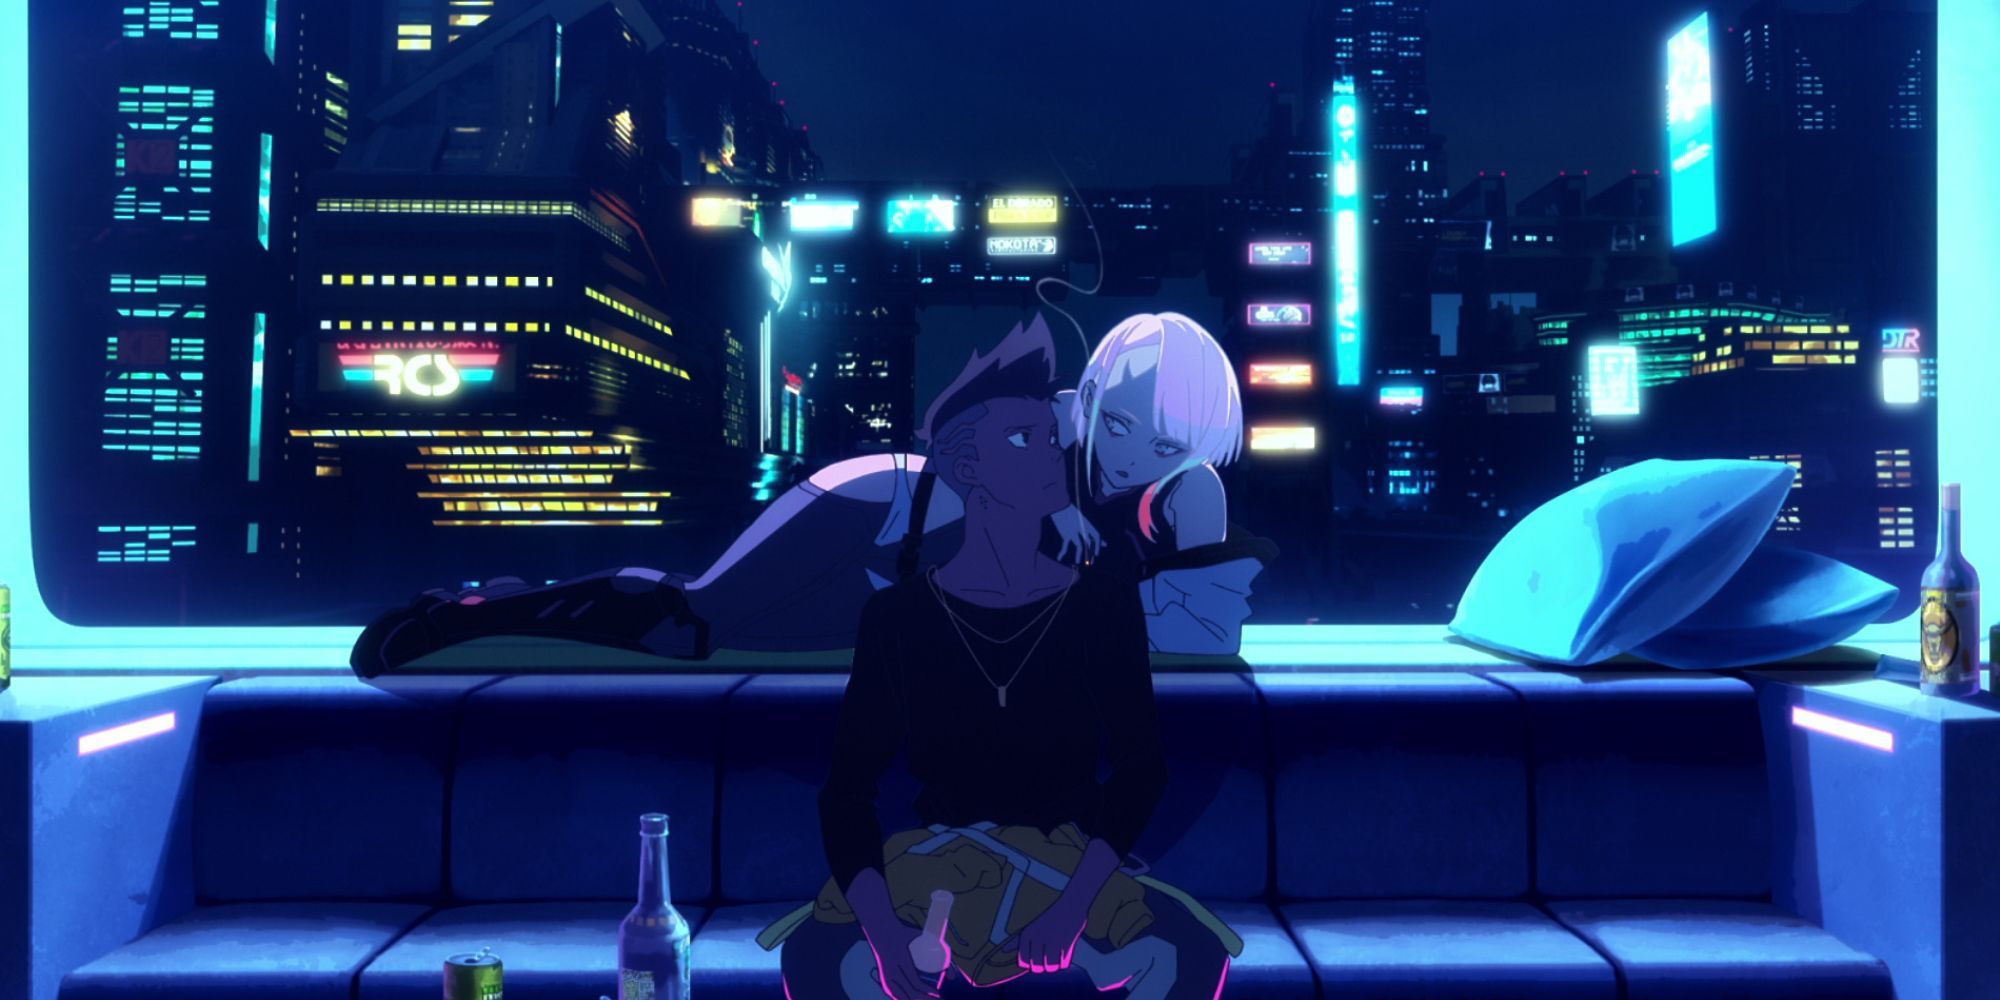 Cyberpunk Edgerunners David Martinez and Lucy sitting on a sofa surrounded by skycrapers in night sky